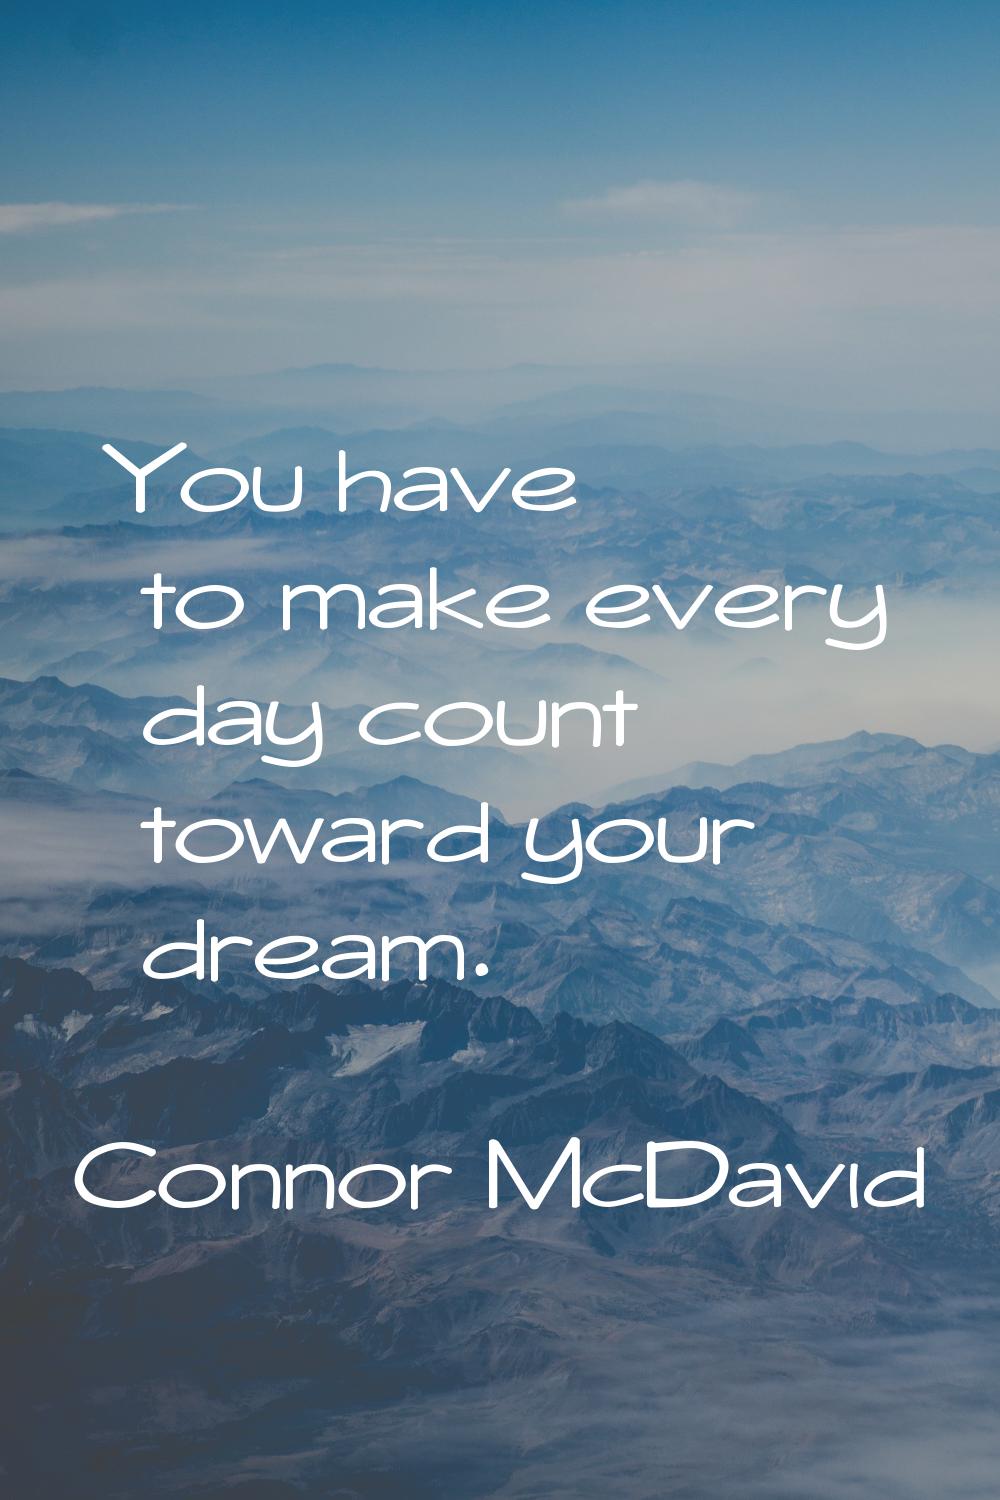 You have to make every day count toward your dream.